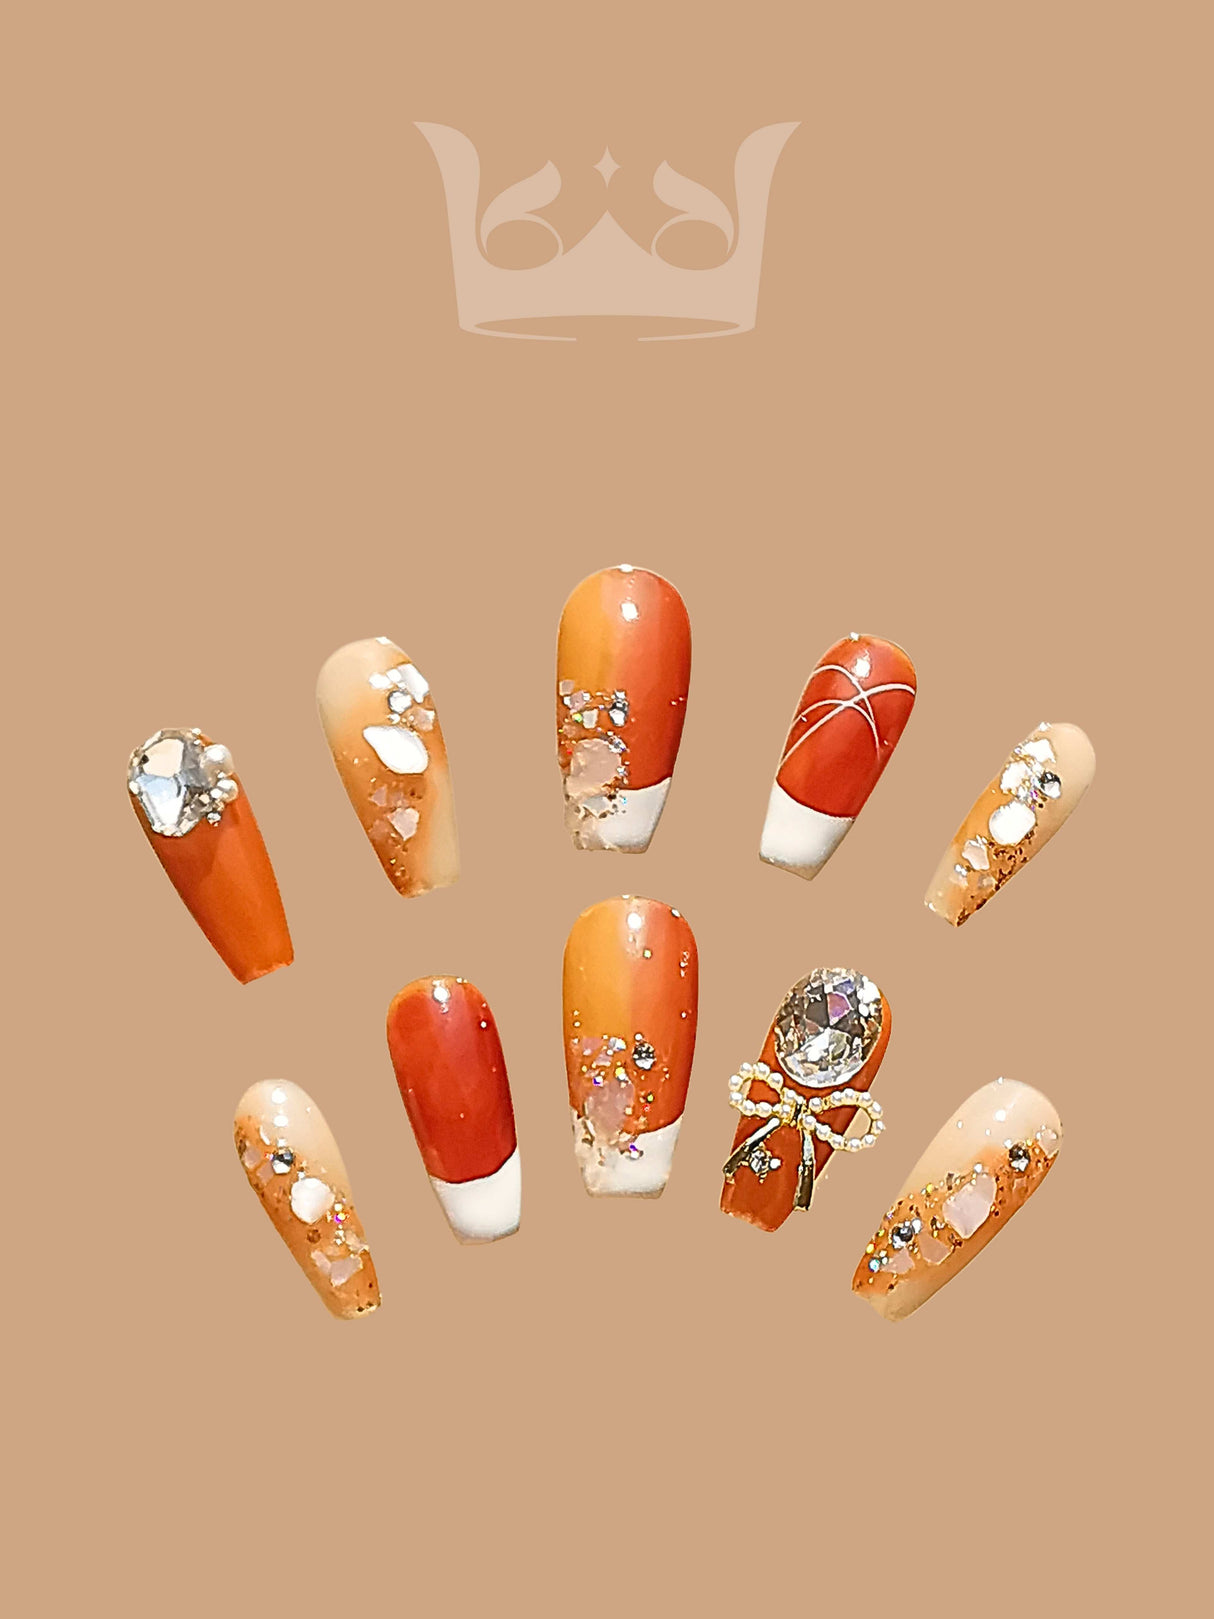 Enhance natural nails with customizable acrylic nails featuring various designs and colors for special occasions or everyday wear. Easy to apply and remove.